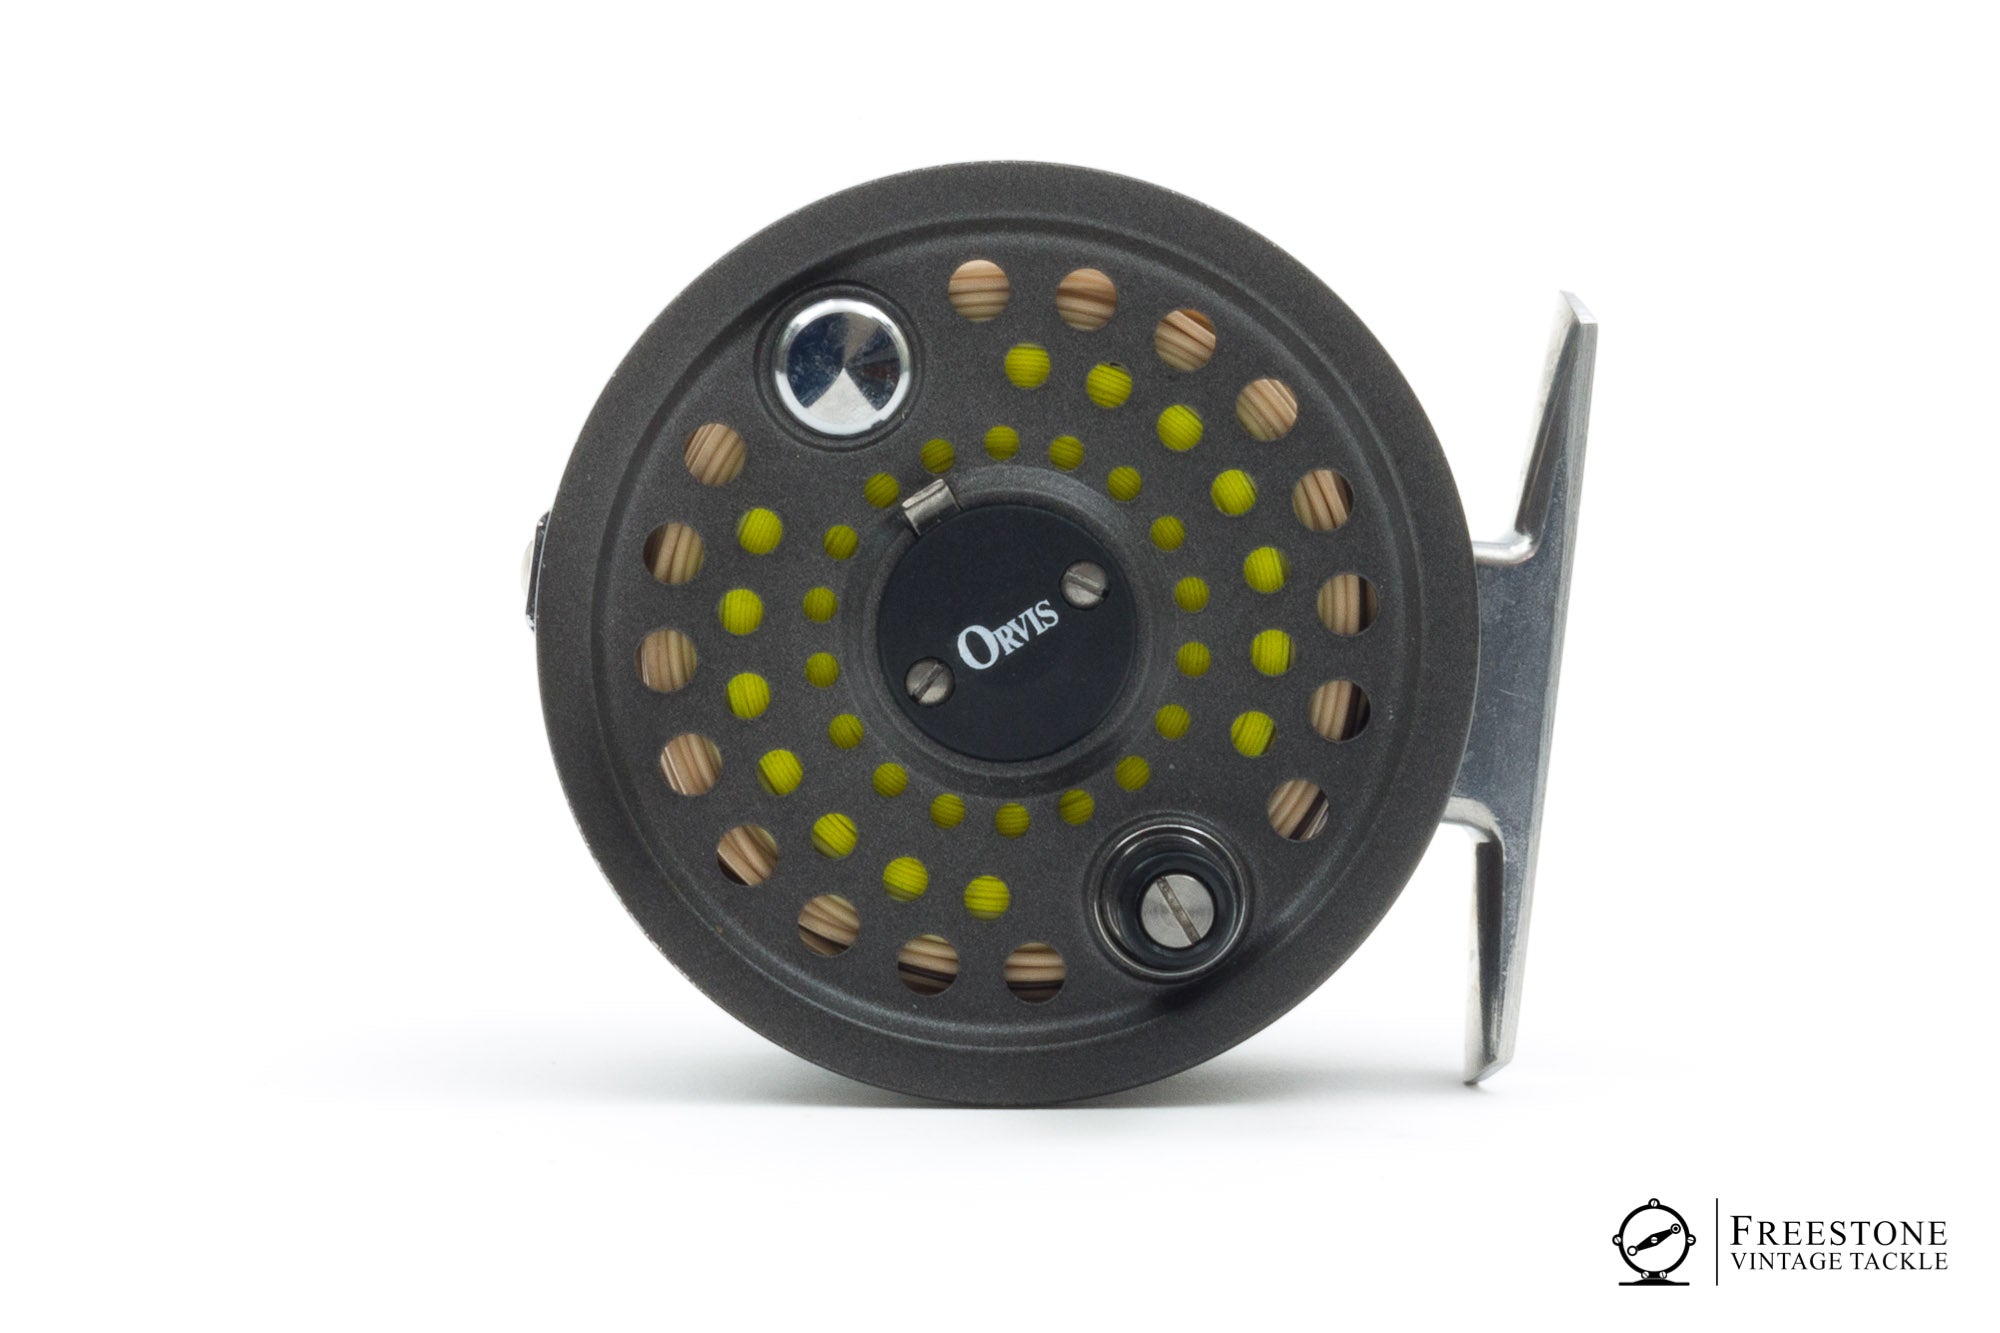 Orvis USA Battenkill Disc 3/4 alloy fly reel Made in England, 2.75 spool,  counter balanced handle